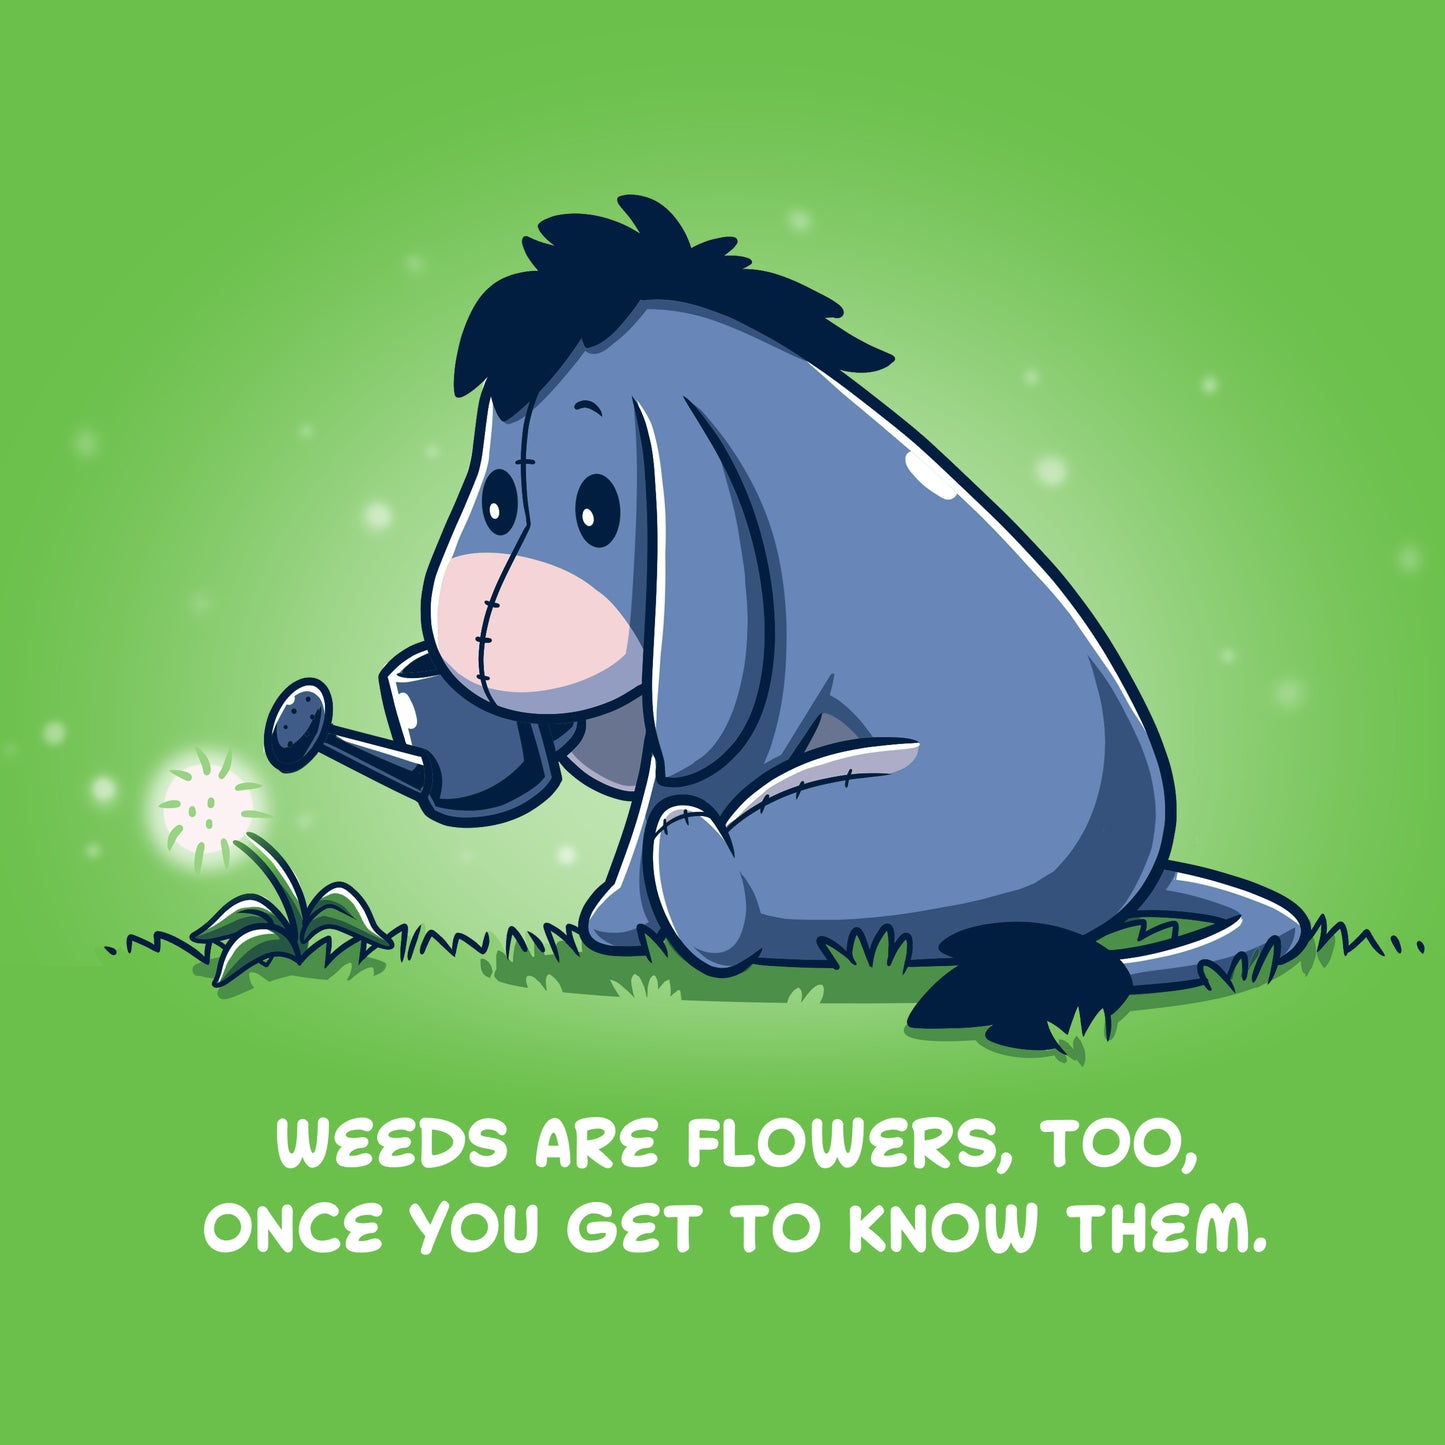 Weeds can be considered flowers, just like Eeyore in the Disney's officially licensed Winnie the Pooh series with the product name "Weeds Are Flowers Too".